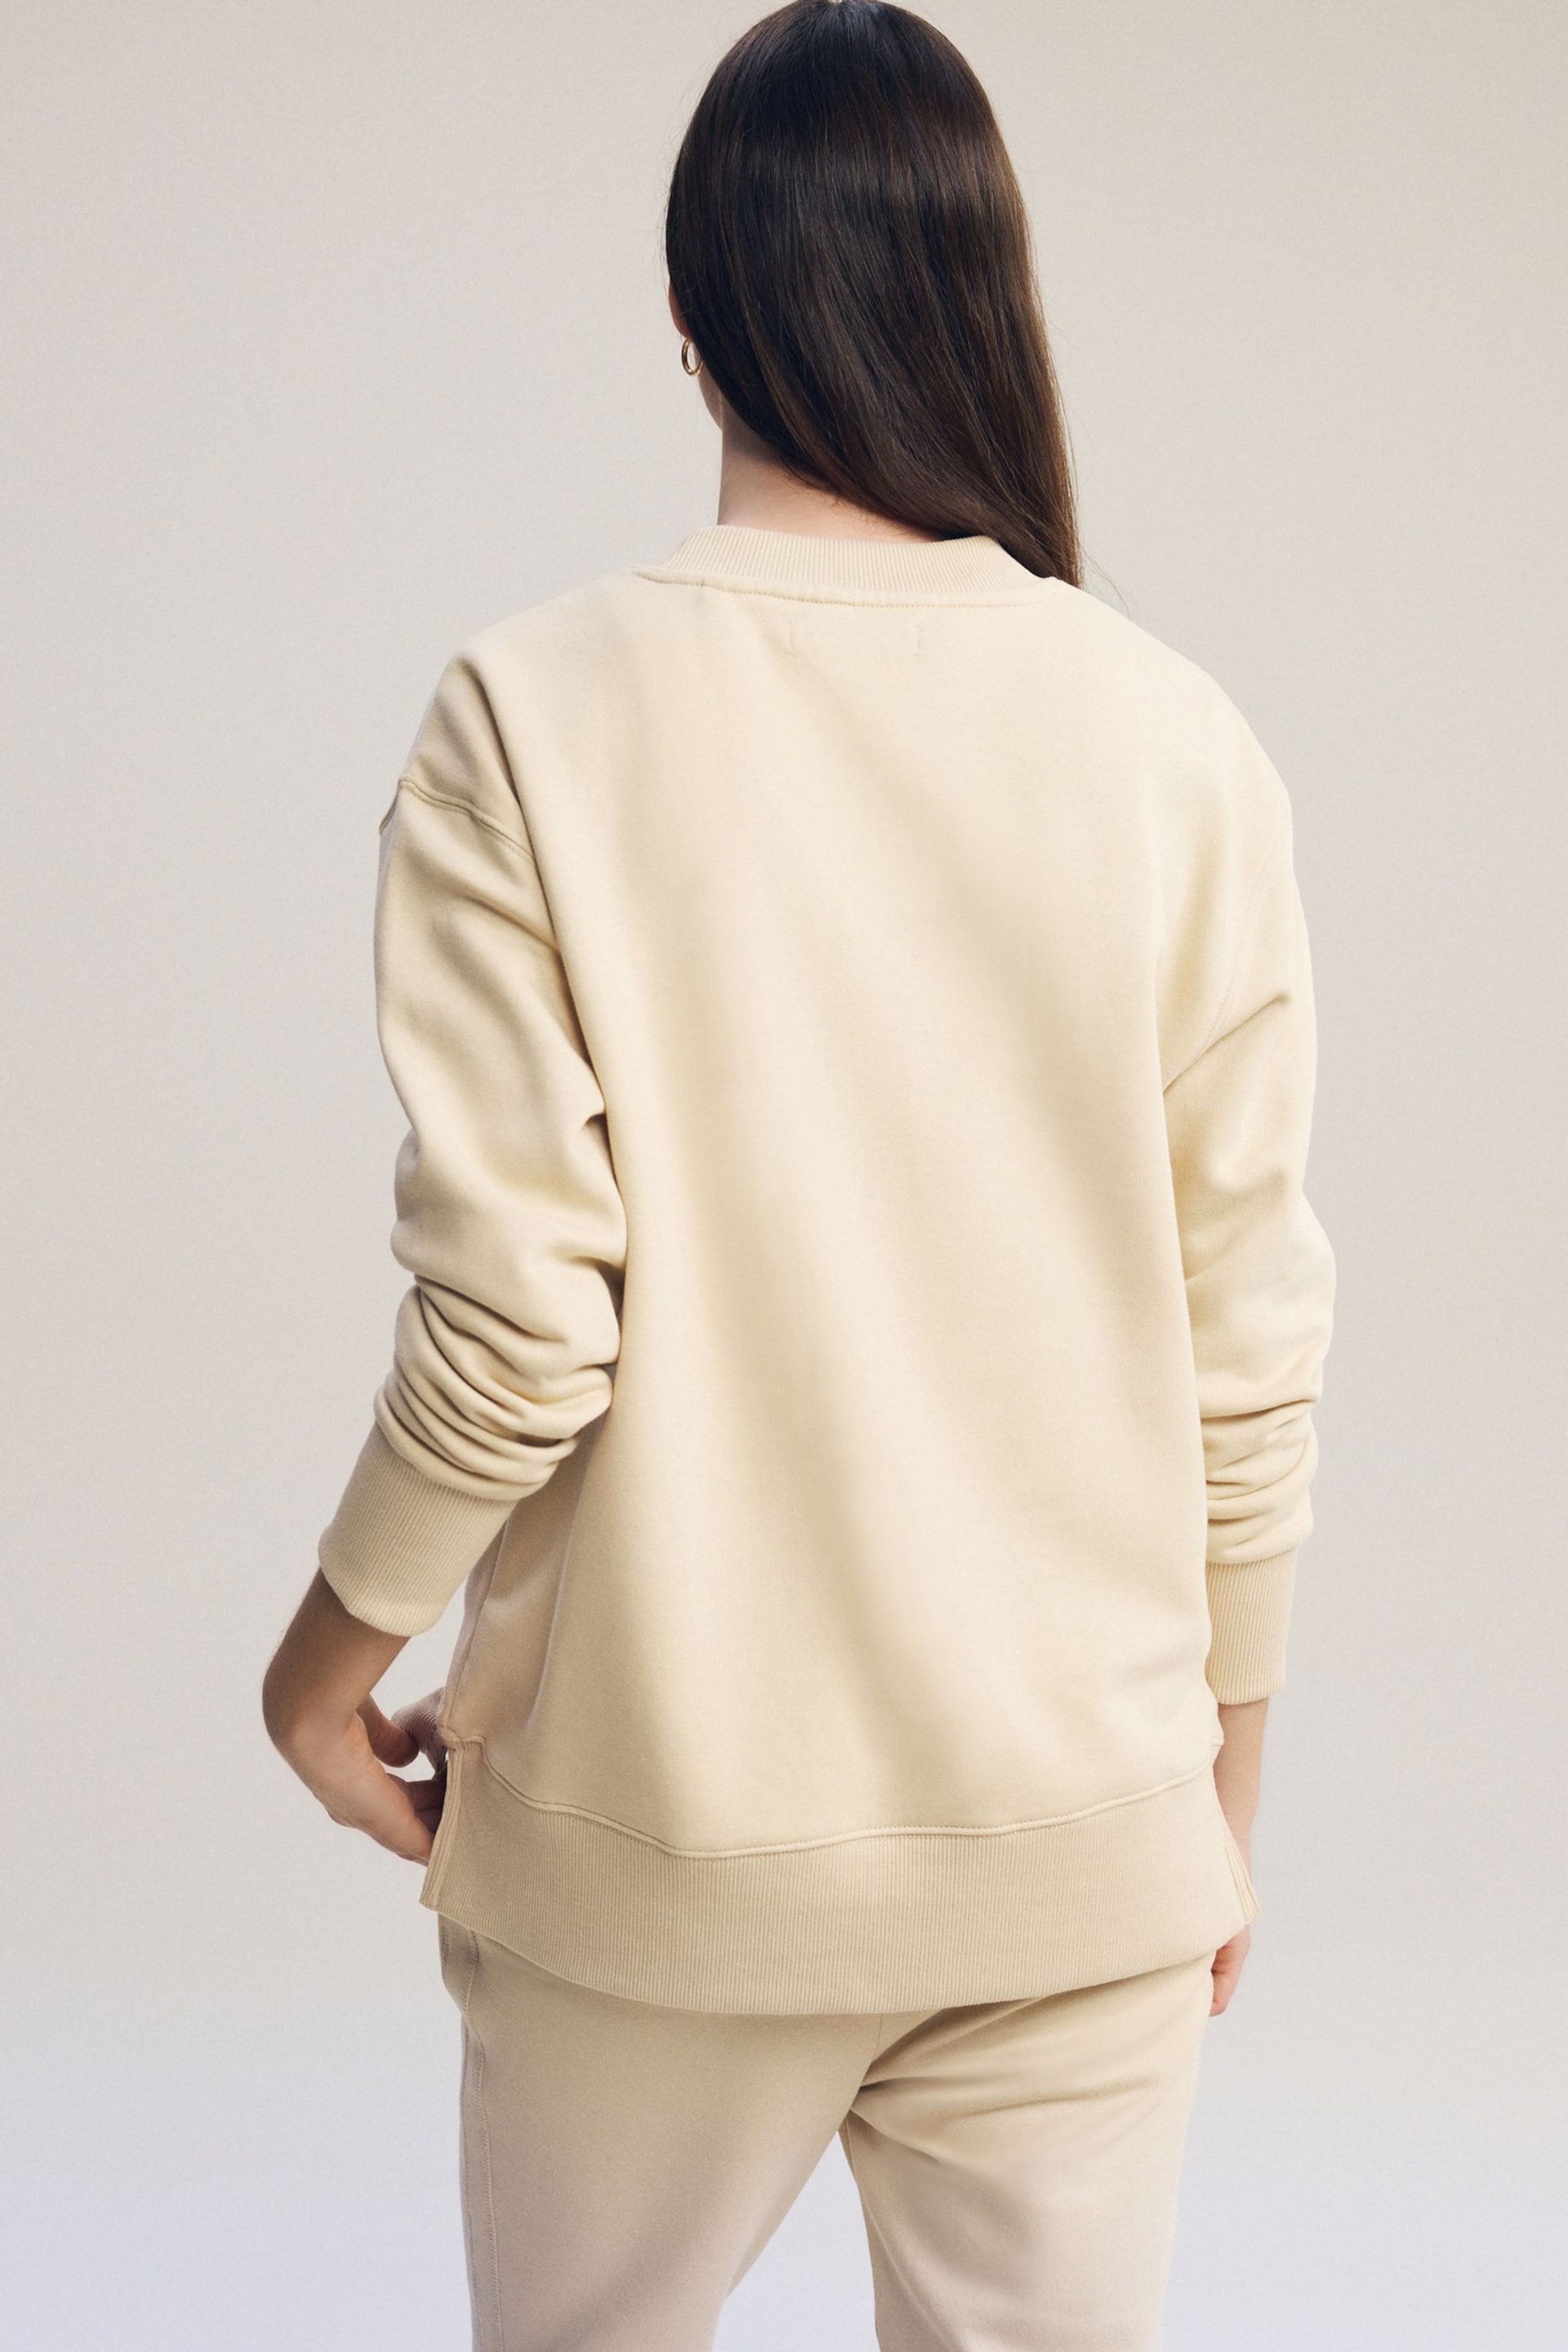 Neutral Essentials Longline Relaxed Fit Cotton Sweatshirt - Image 3 of 6